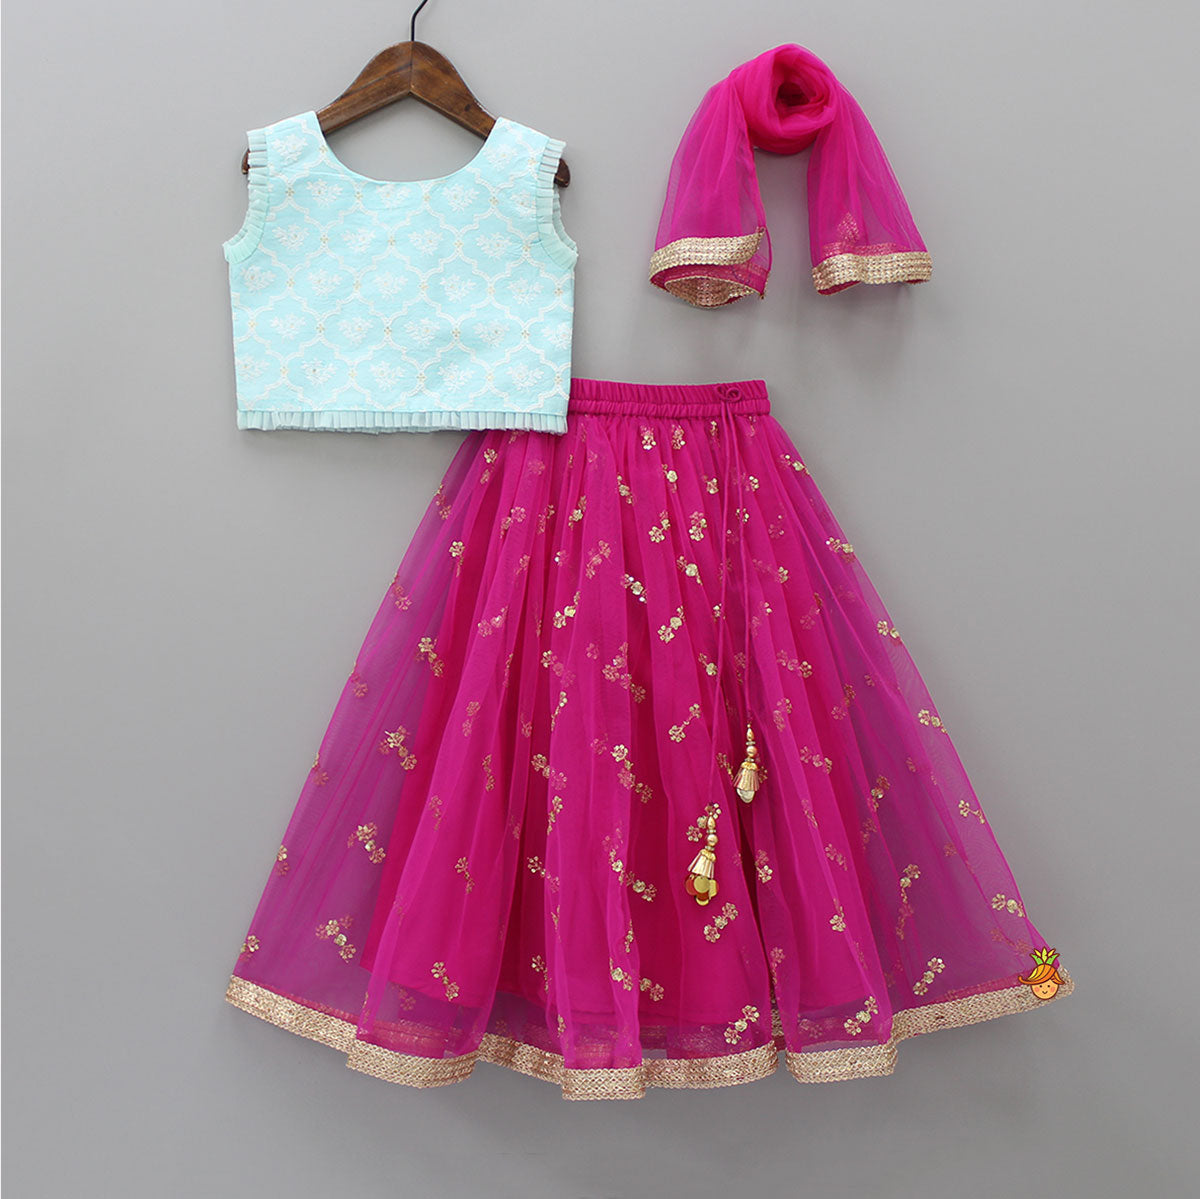 Ethnic Floral Motifs Printed Top And Hot Pink Sequins Lehenga With Dupatta